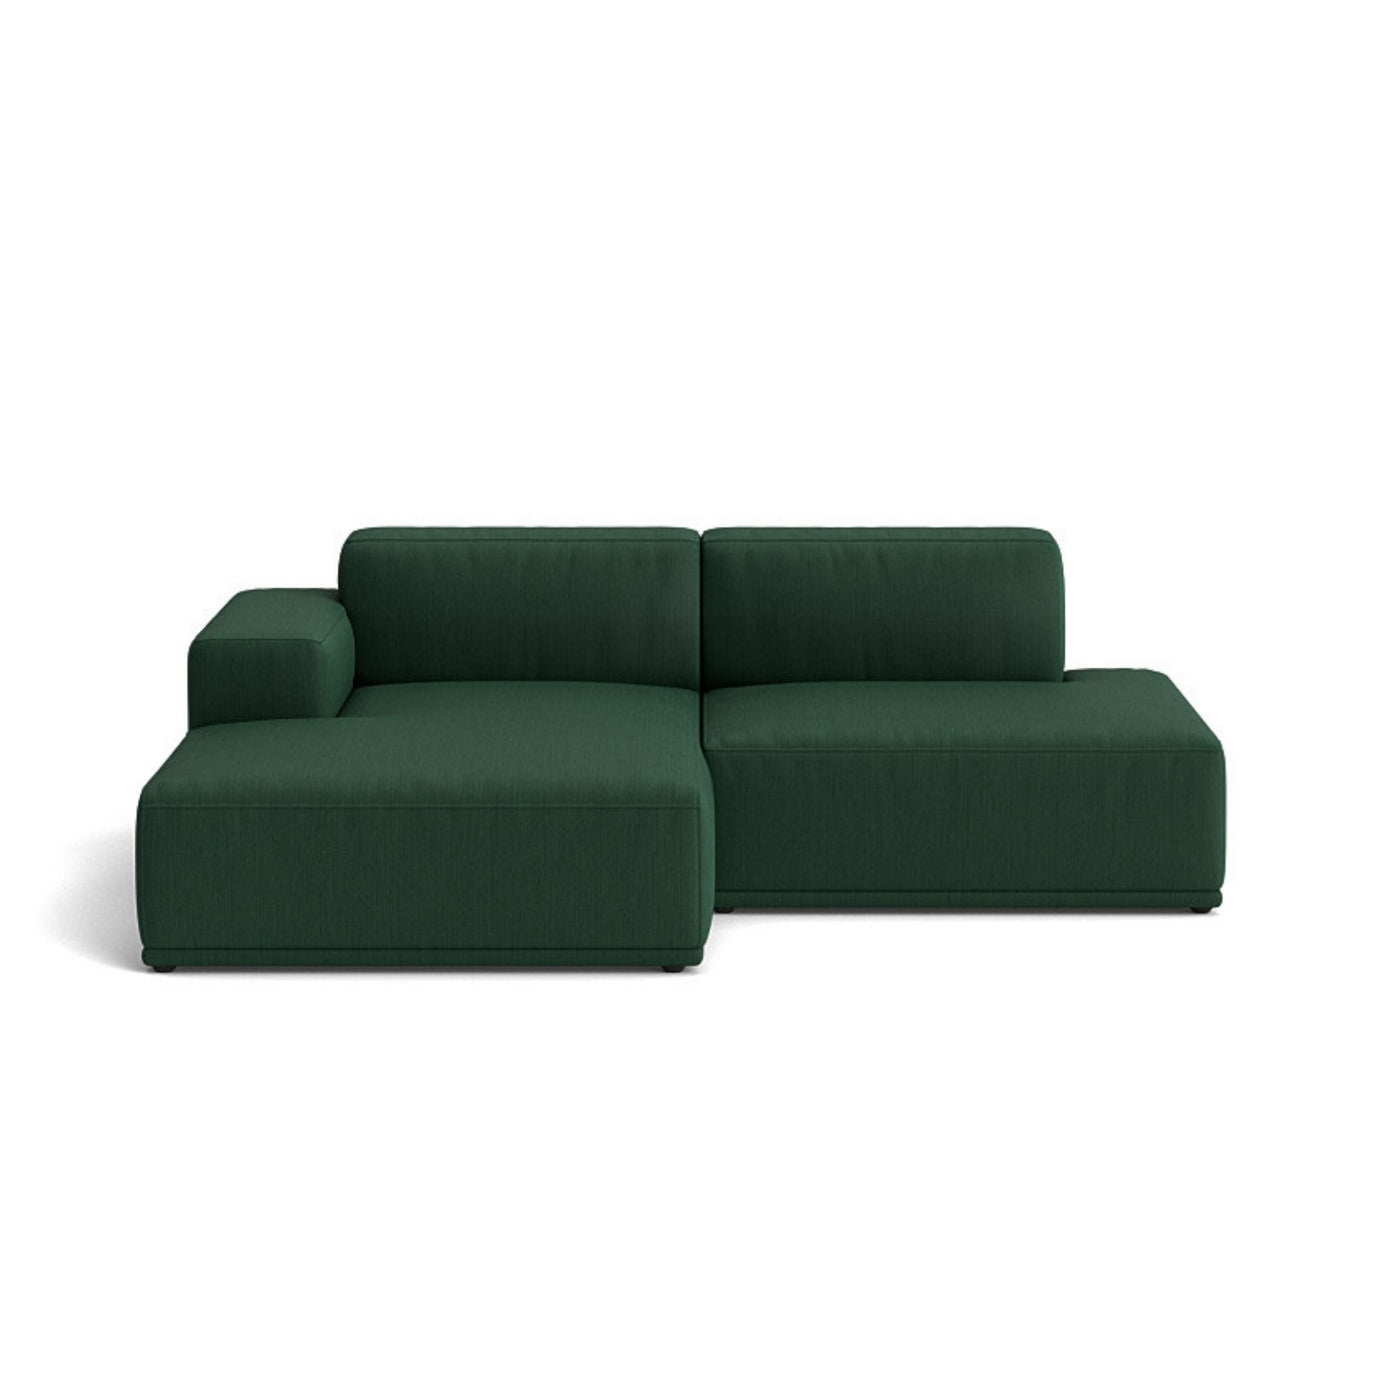 Muuto Connect Soft Modular 2 Seater Sofa, configuration 3. made-to-order from someday designs. #colour_balder-982